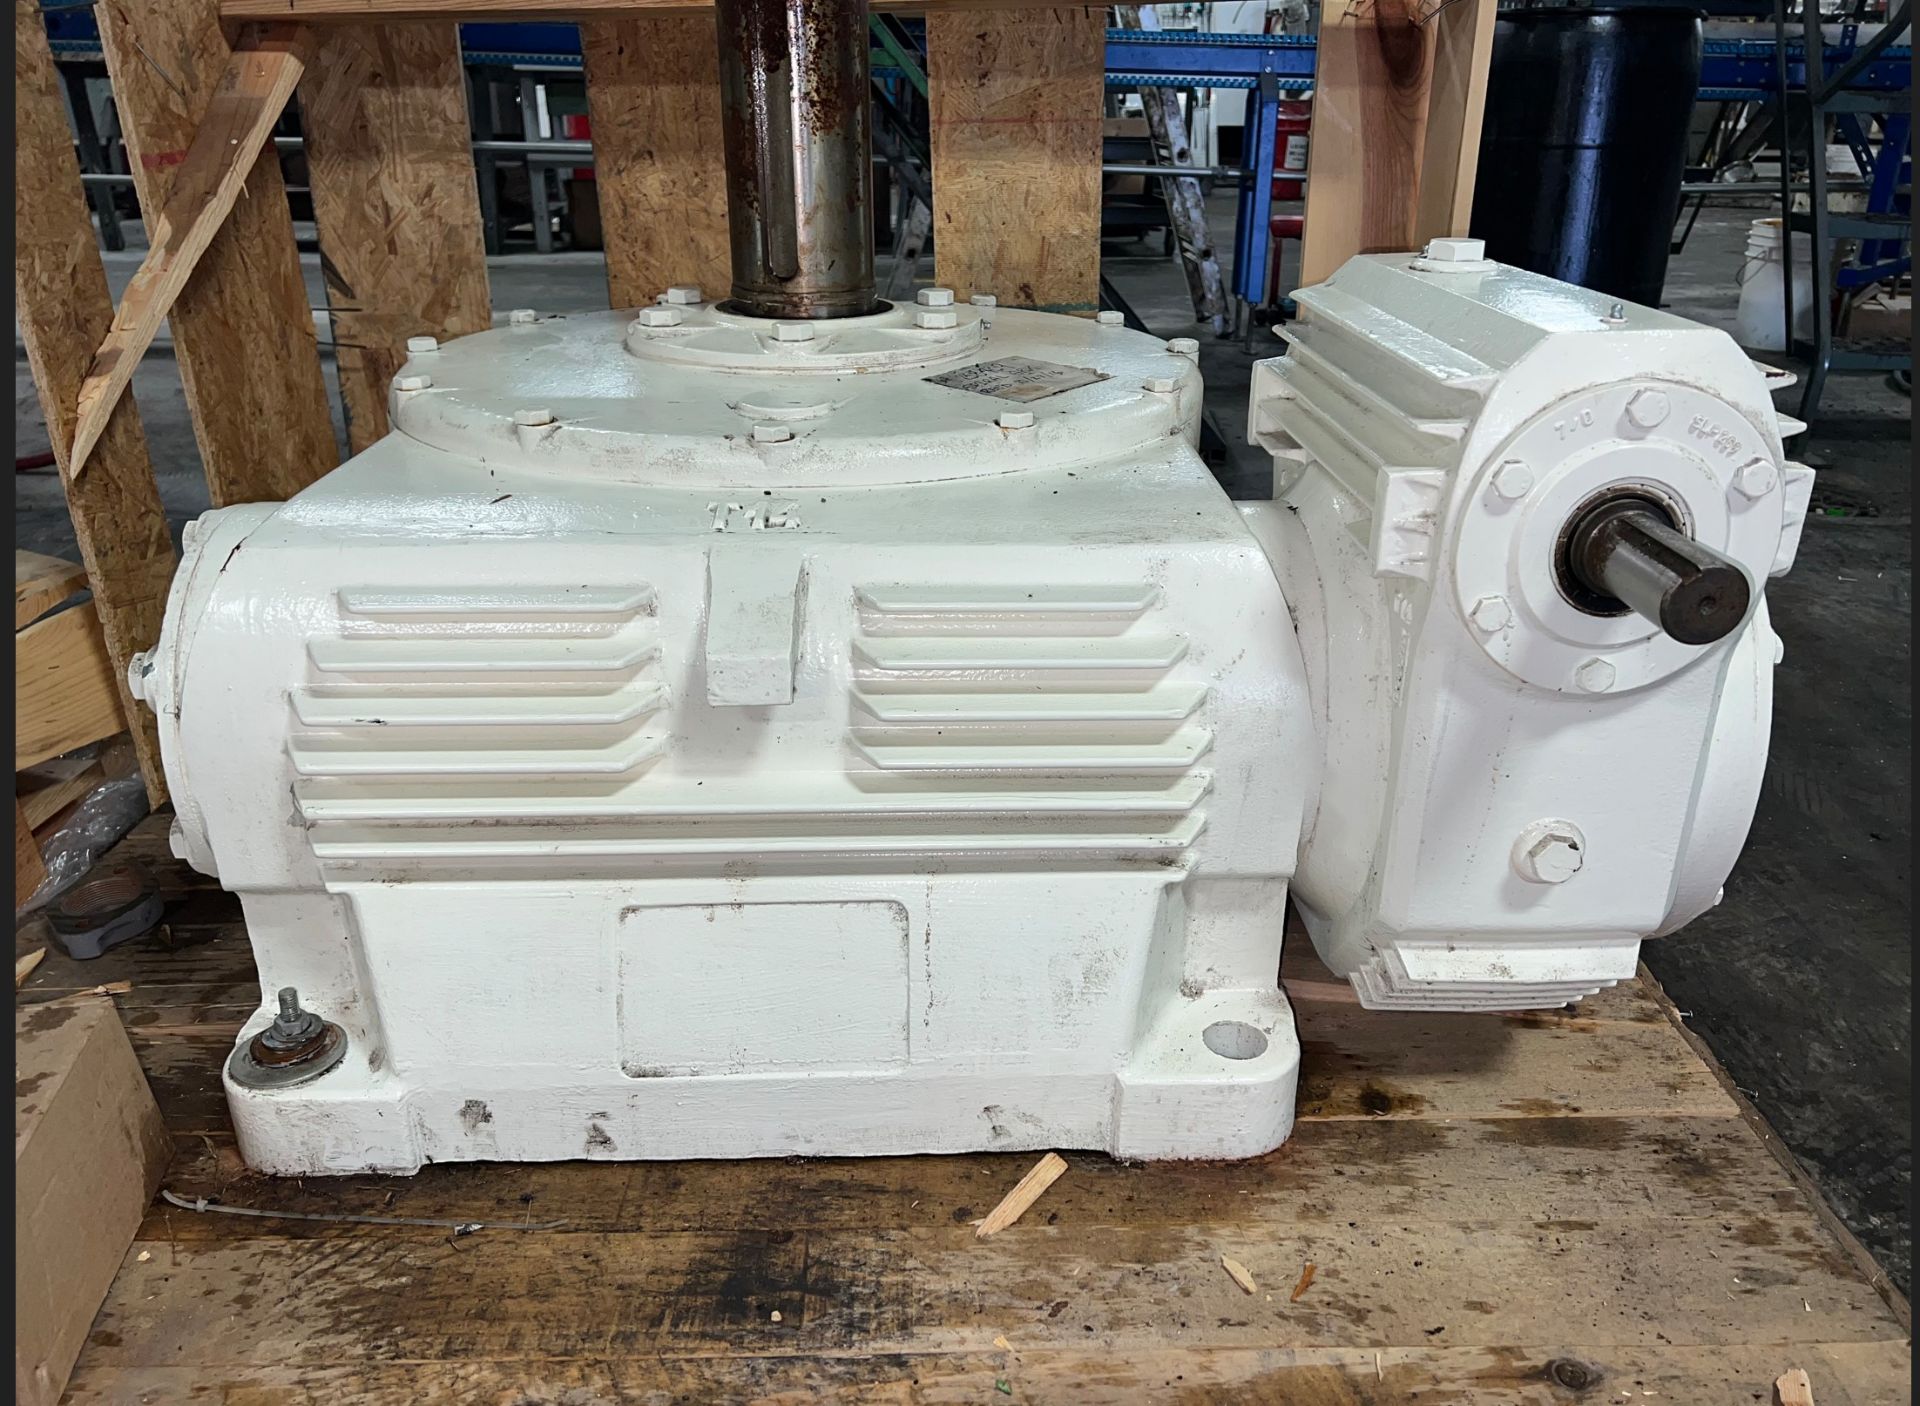 Never Used Spiral Freezer Gear Box - Large item 2500-pound, with 5" output shaft, 1.75" input shaft.